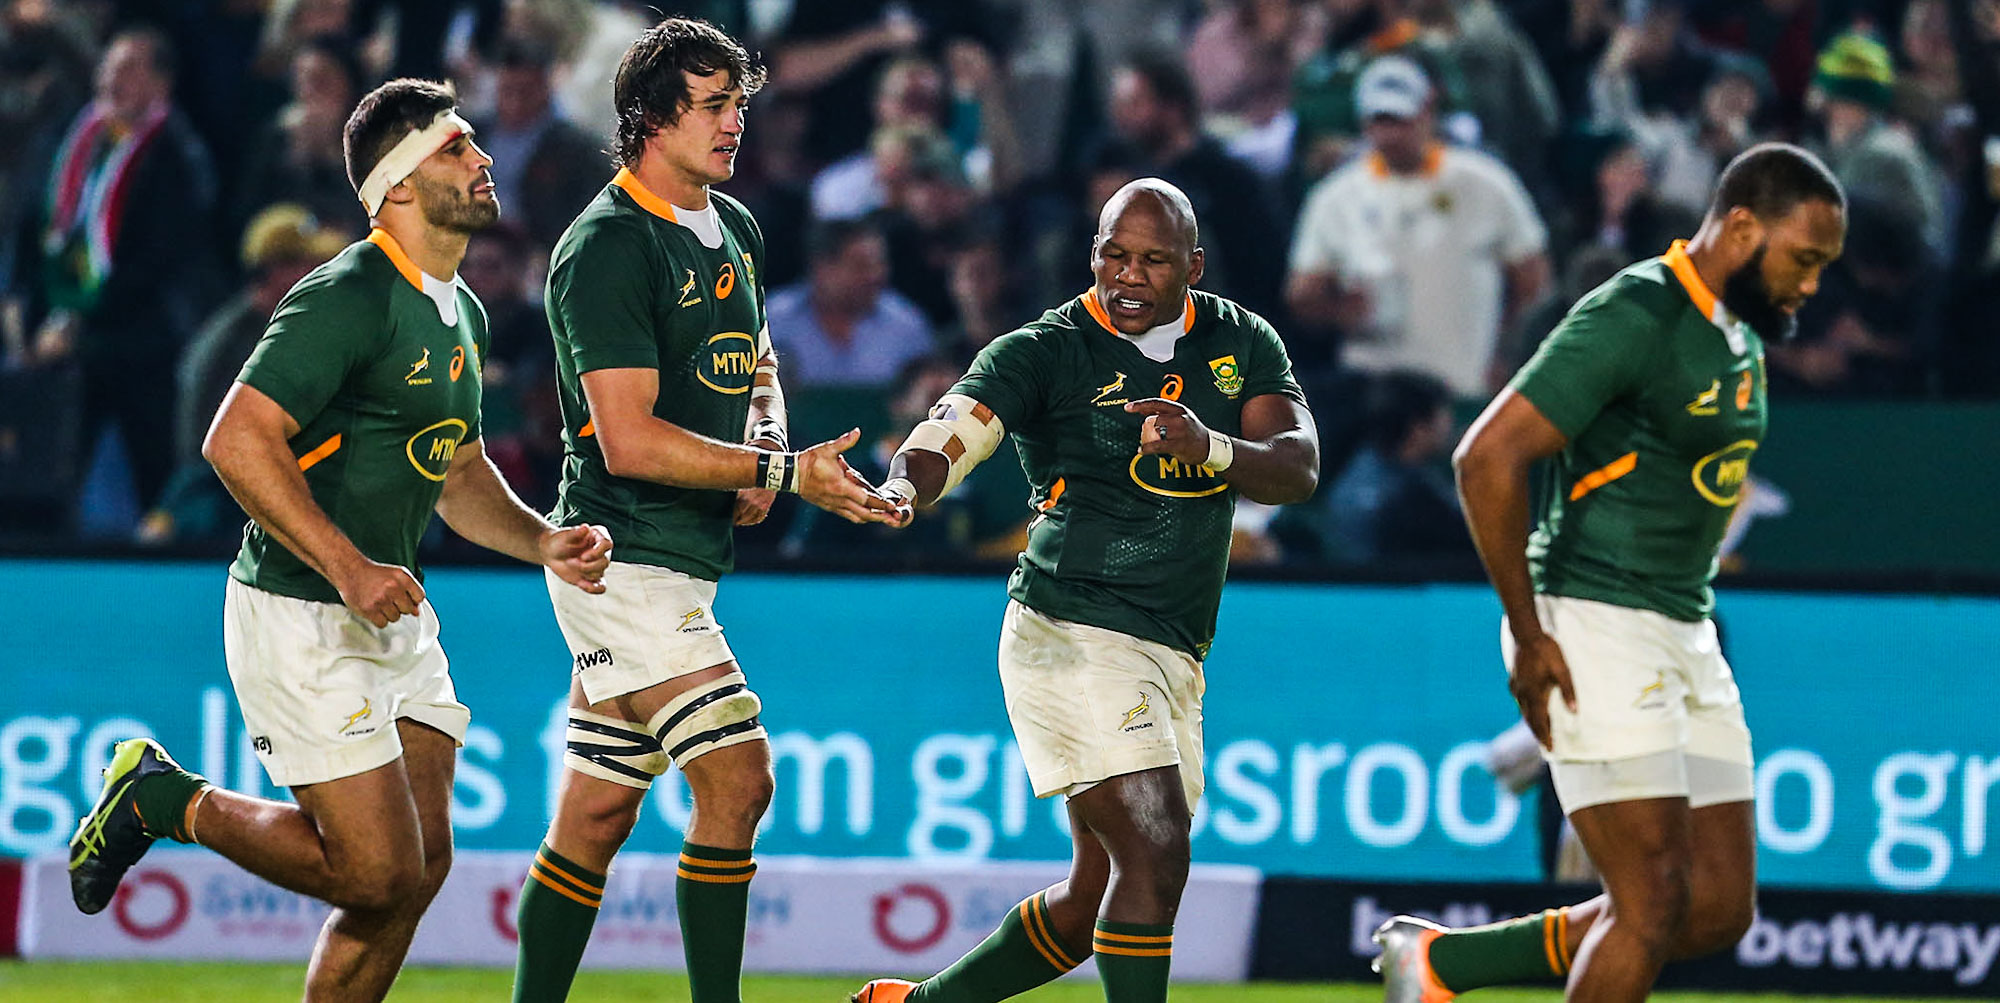 Franco Mostert congratulates Bongi Mbonambi with his 10th Test try.